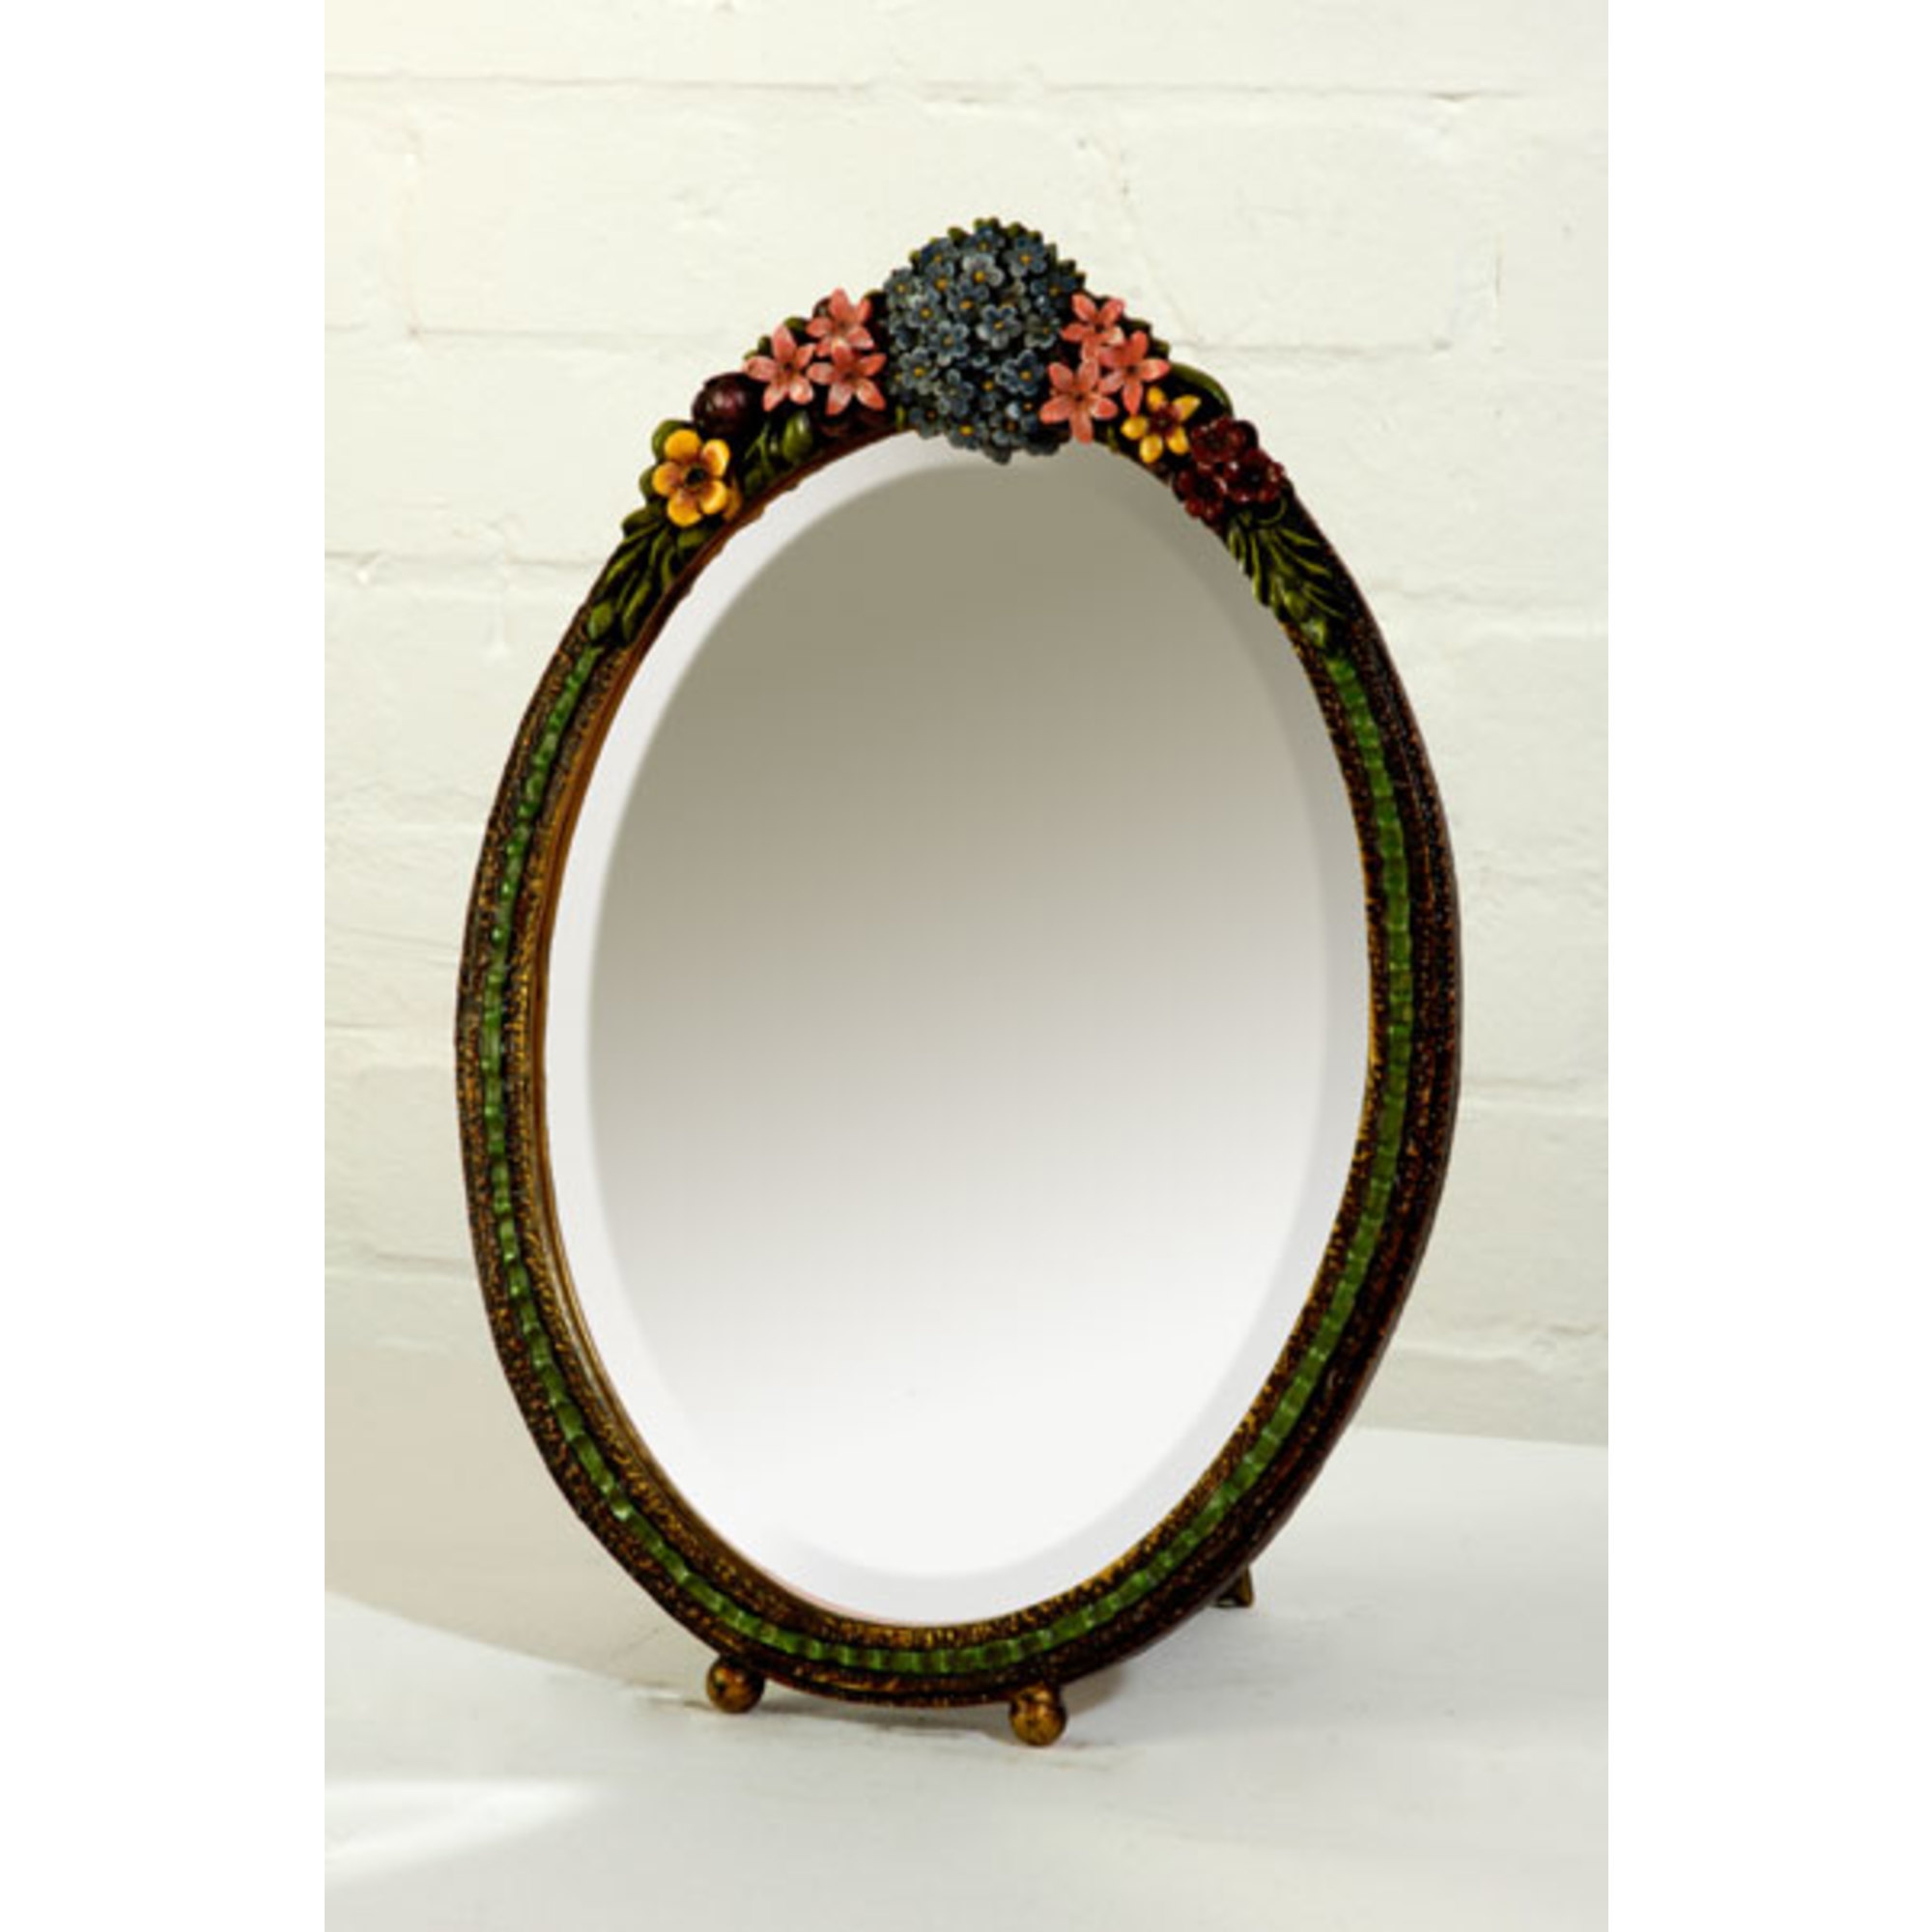 Barbola Floral Multicolour Oval Bevelled Decorative Table or Wall Mirror